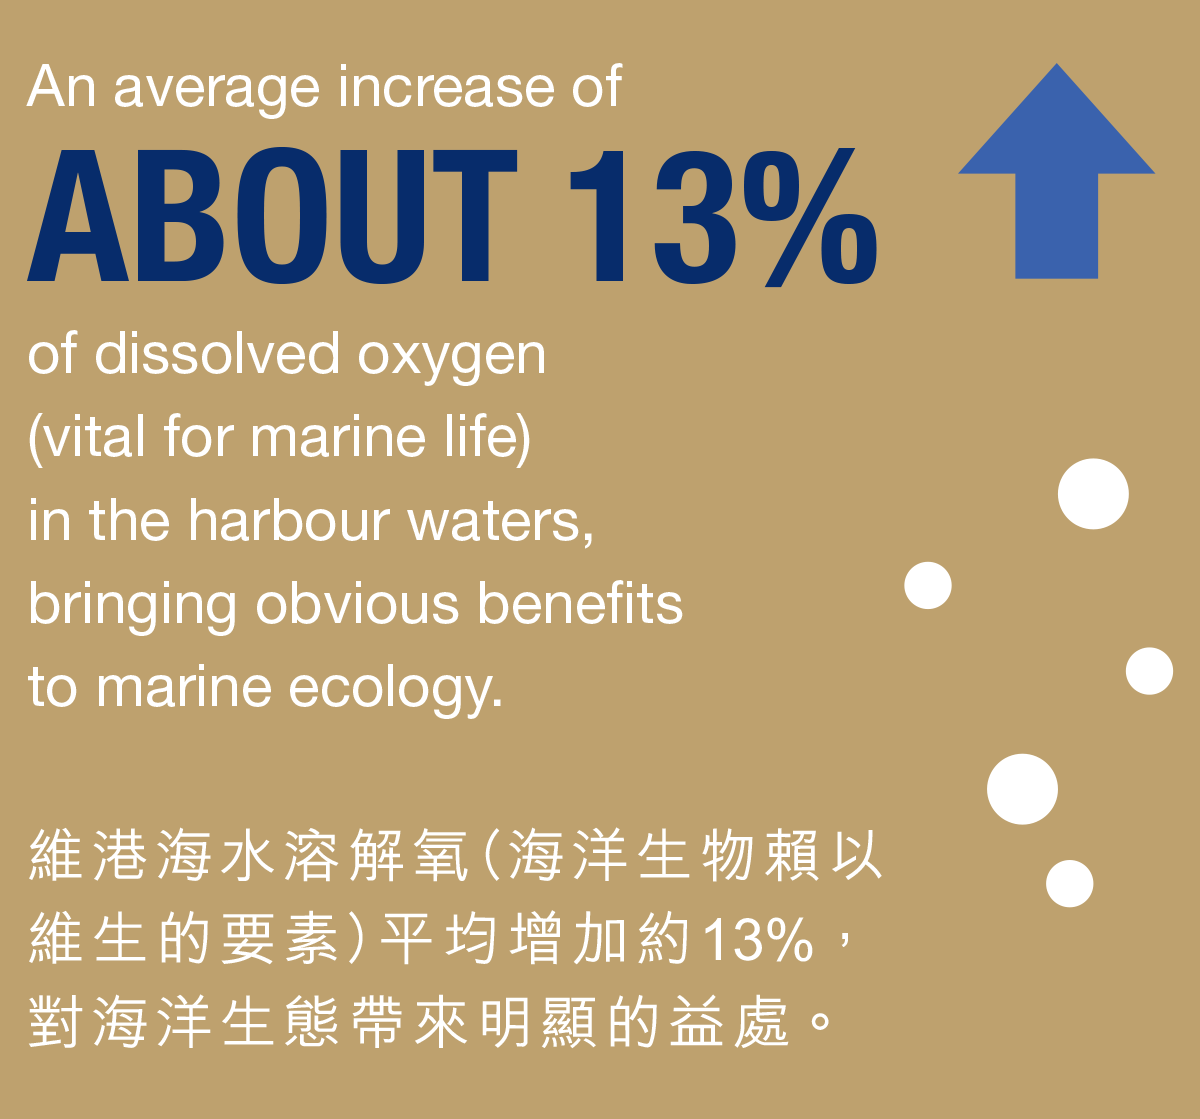 An average increase of ABOUT 13% of dissolved oxygen (vital for marine life) in the harbour waters, bringing obvious benefi ts to marine ecology.